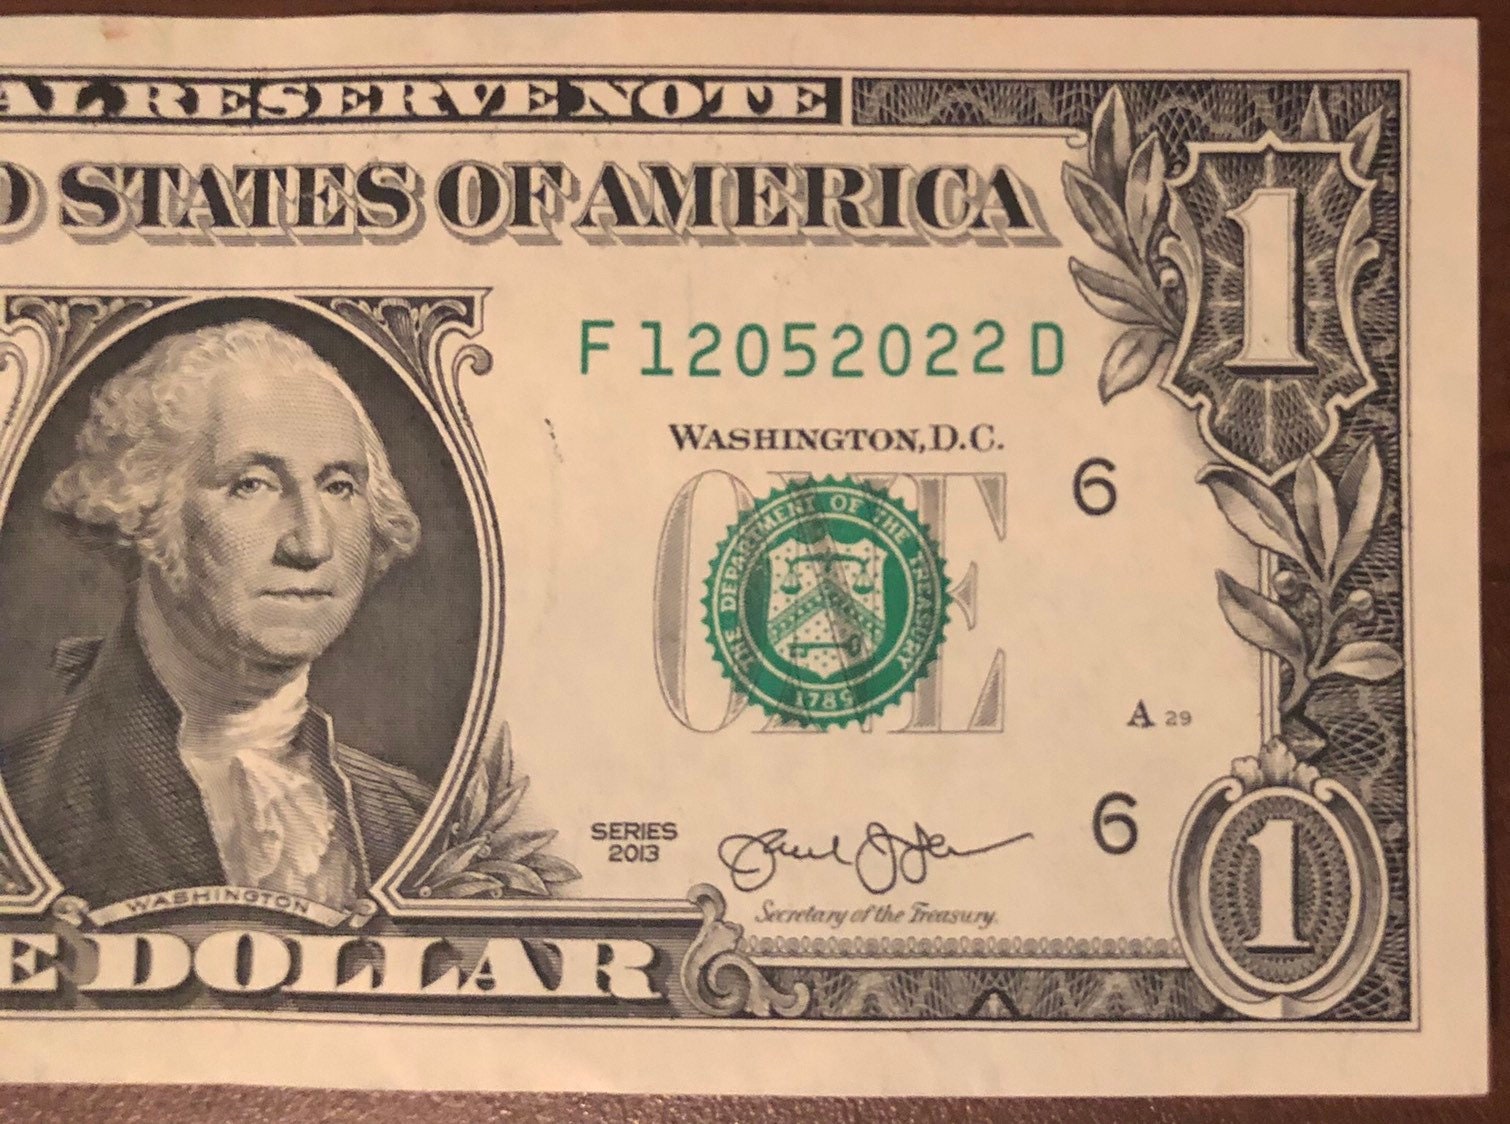 1 American Dollar banknote - Exchange yours for cash today